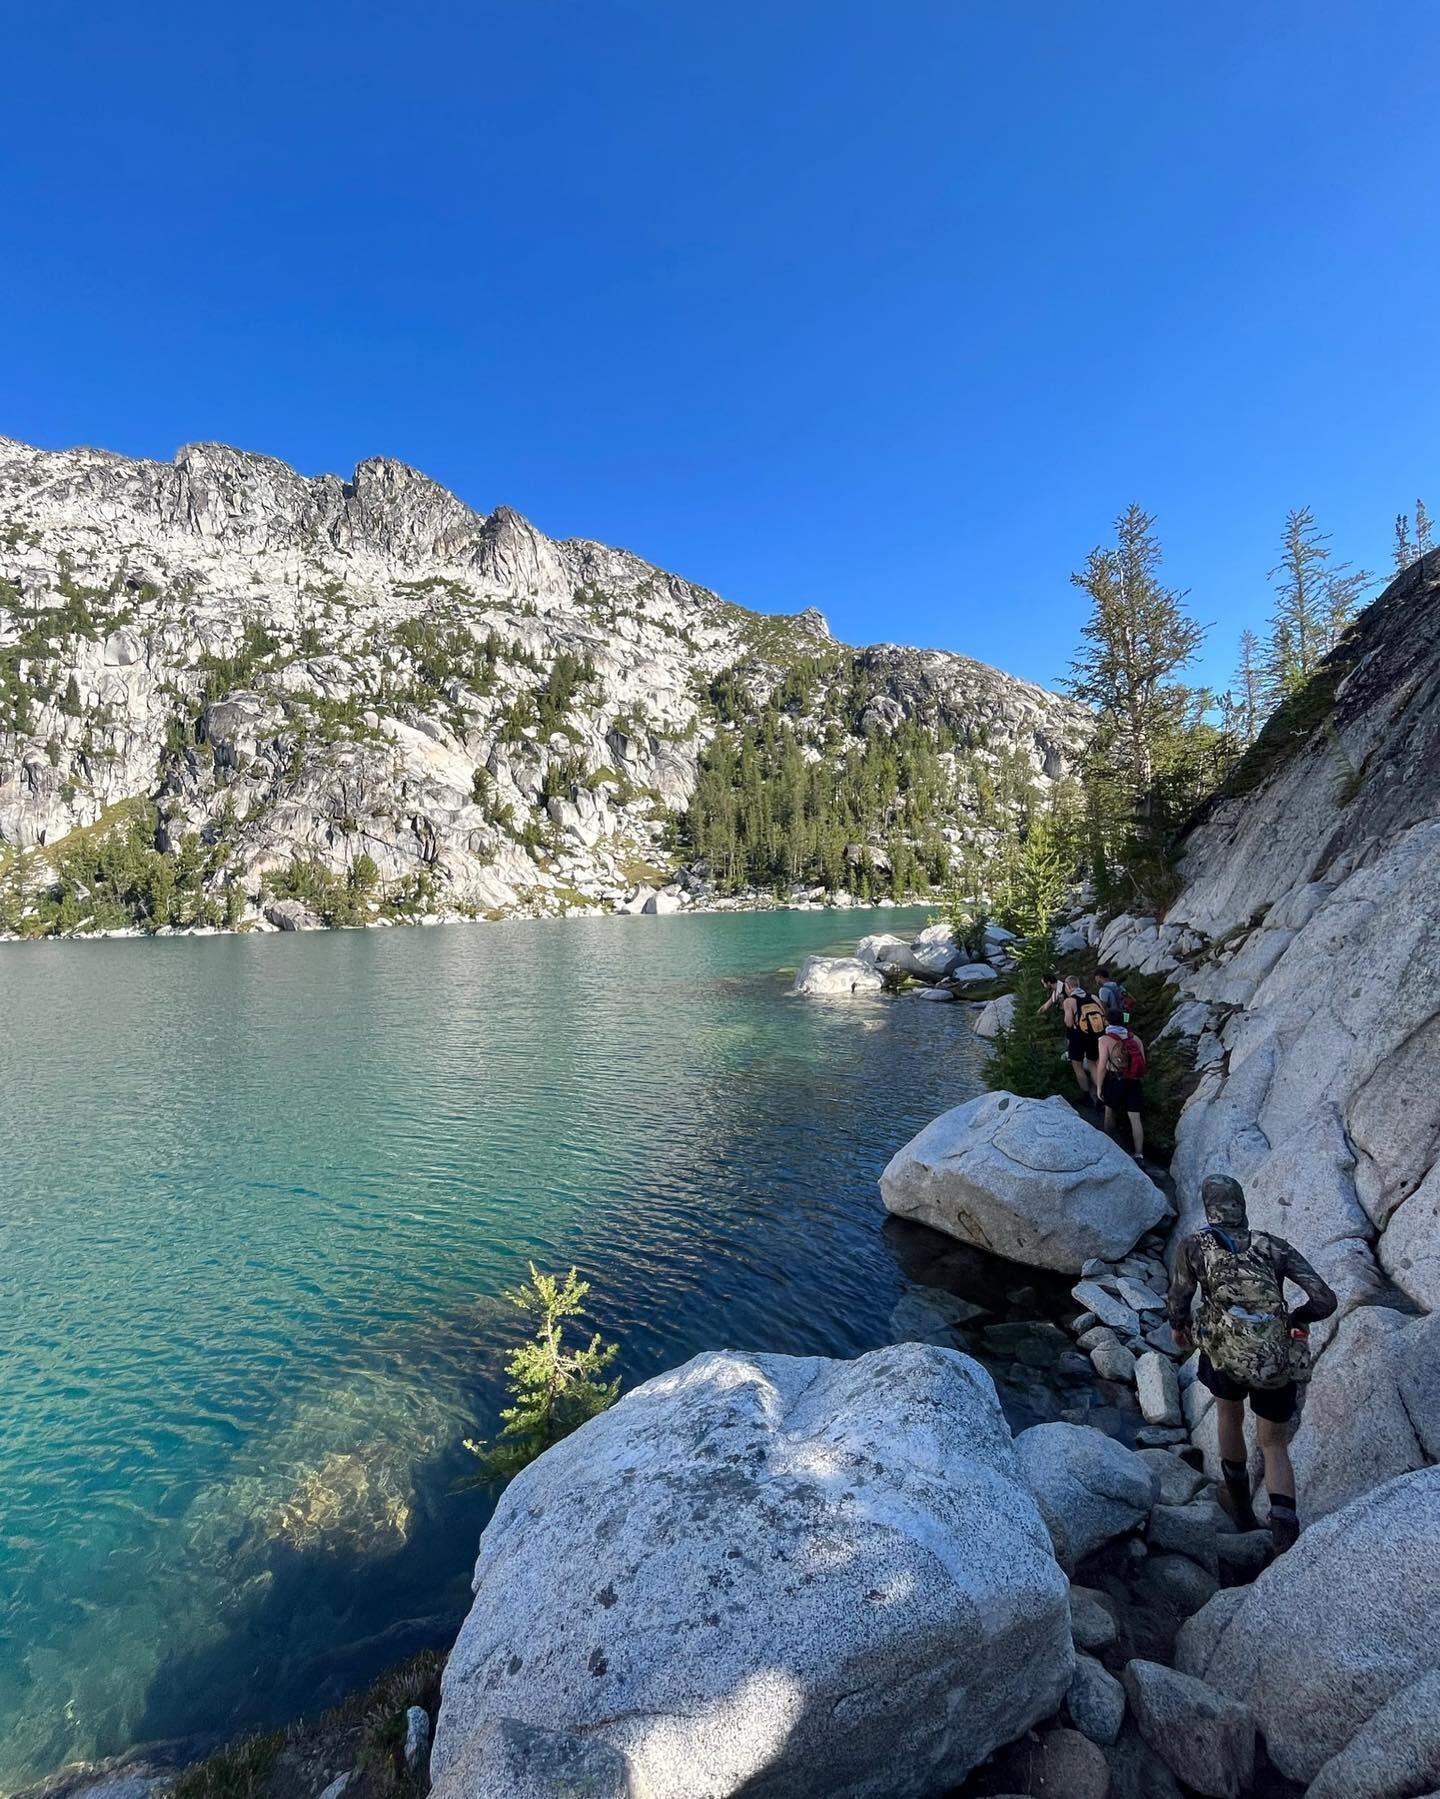 7 of our guys hiked the breathtaking Enchantments this past weekend 🤩 24 miles in 11 hours. Here are some flicks we got